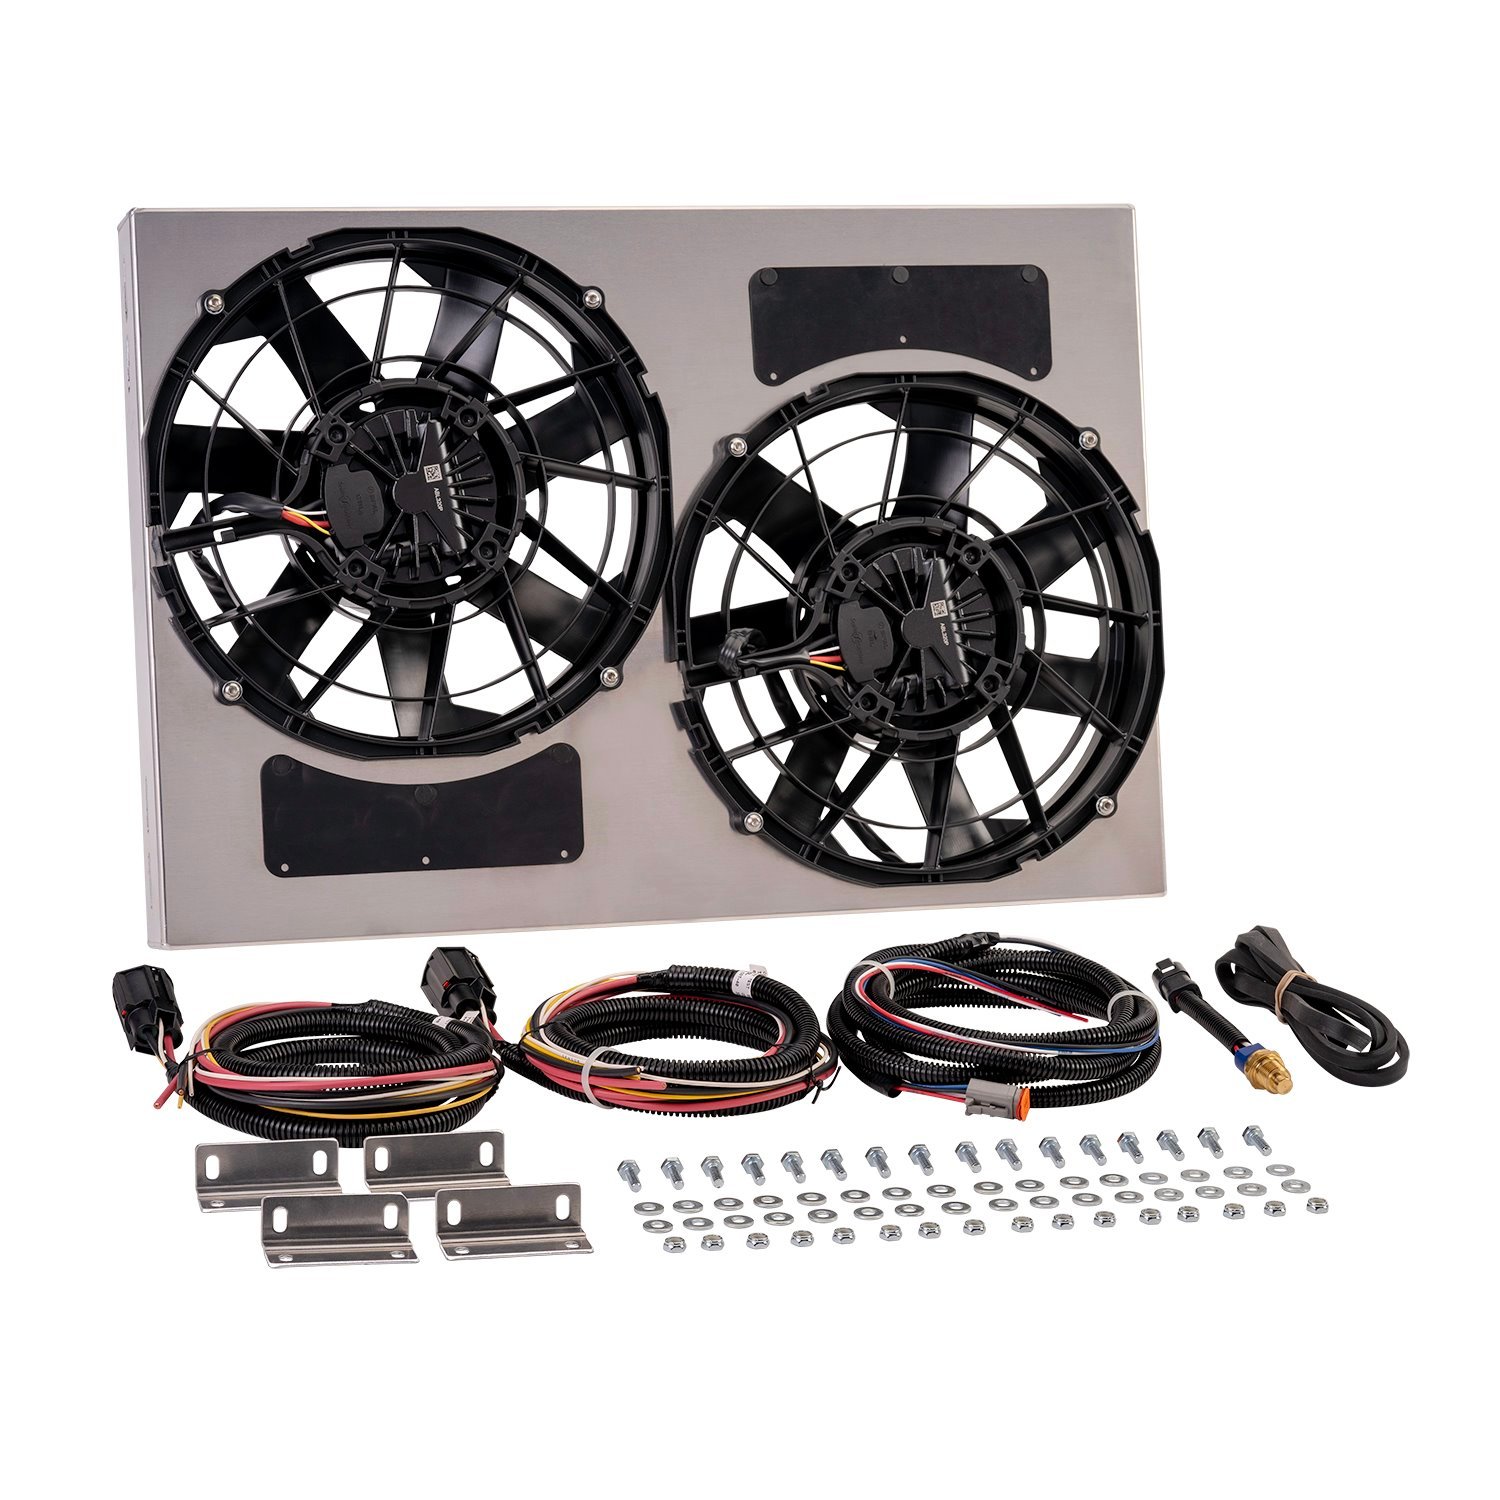 67938-215 Brushless Dual Powerpack 12 in. Radiator Fan Assembly with Integrated 185 Degree PWM Controller